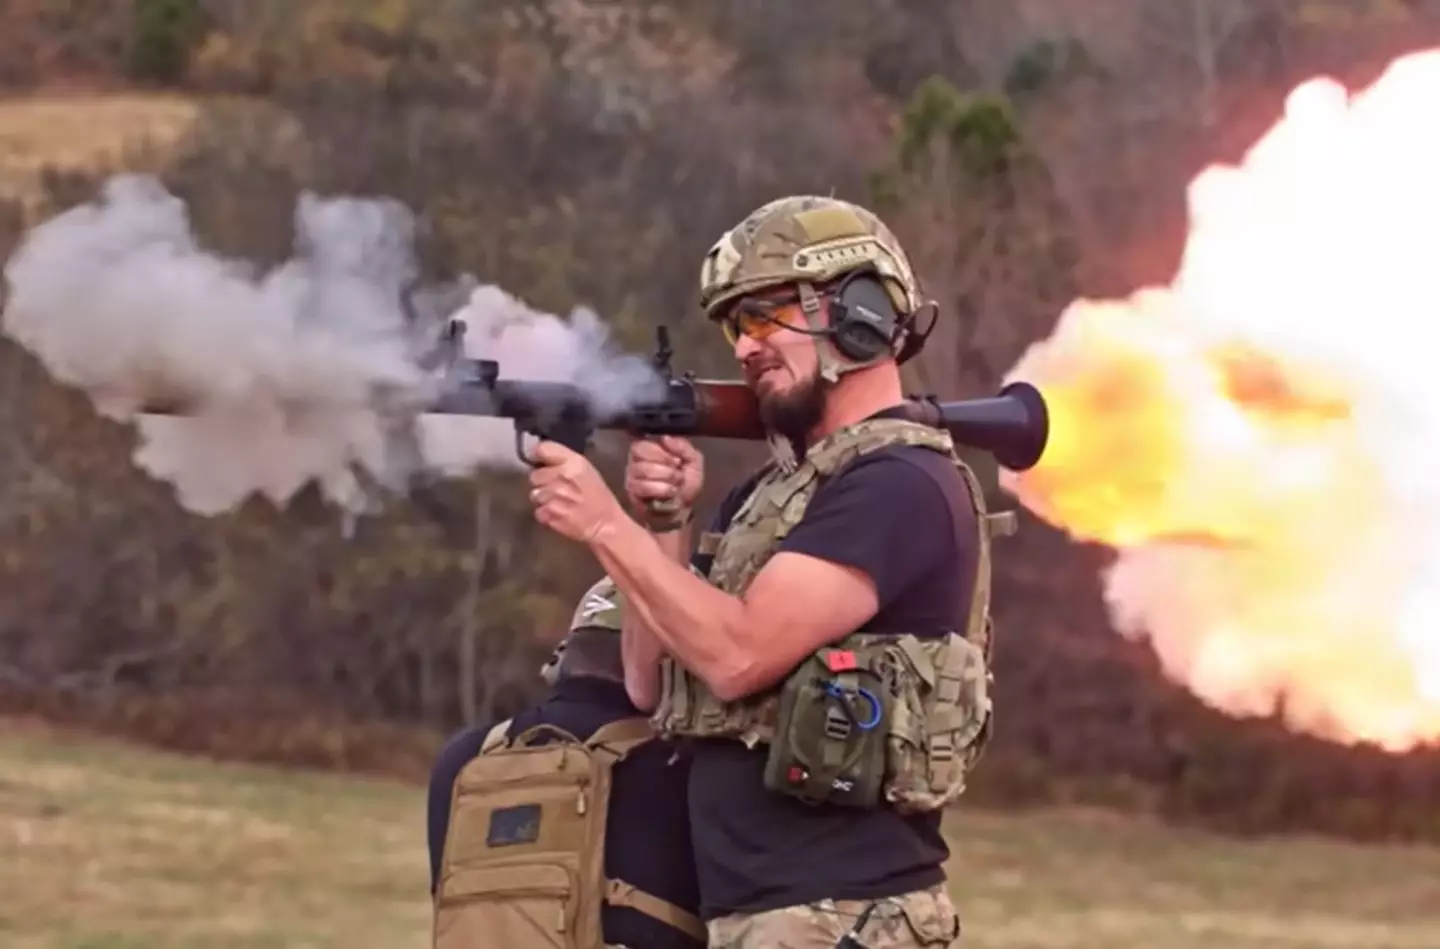 Adam firing the RPG-7, with a slow-mo shot demonstrating the backblast.